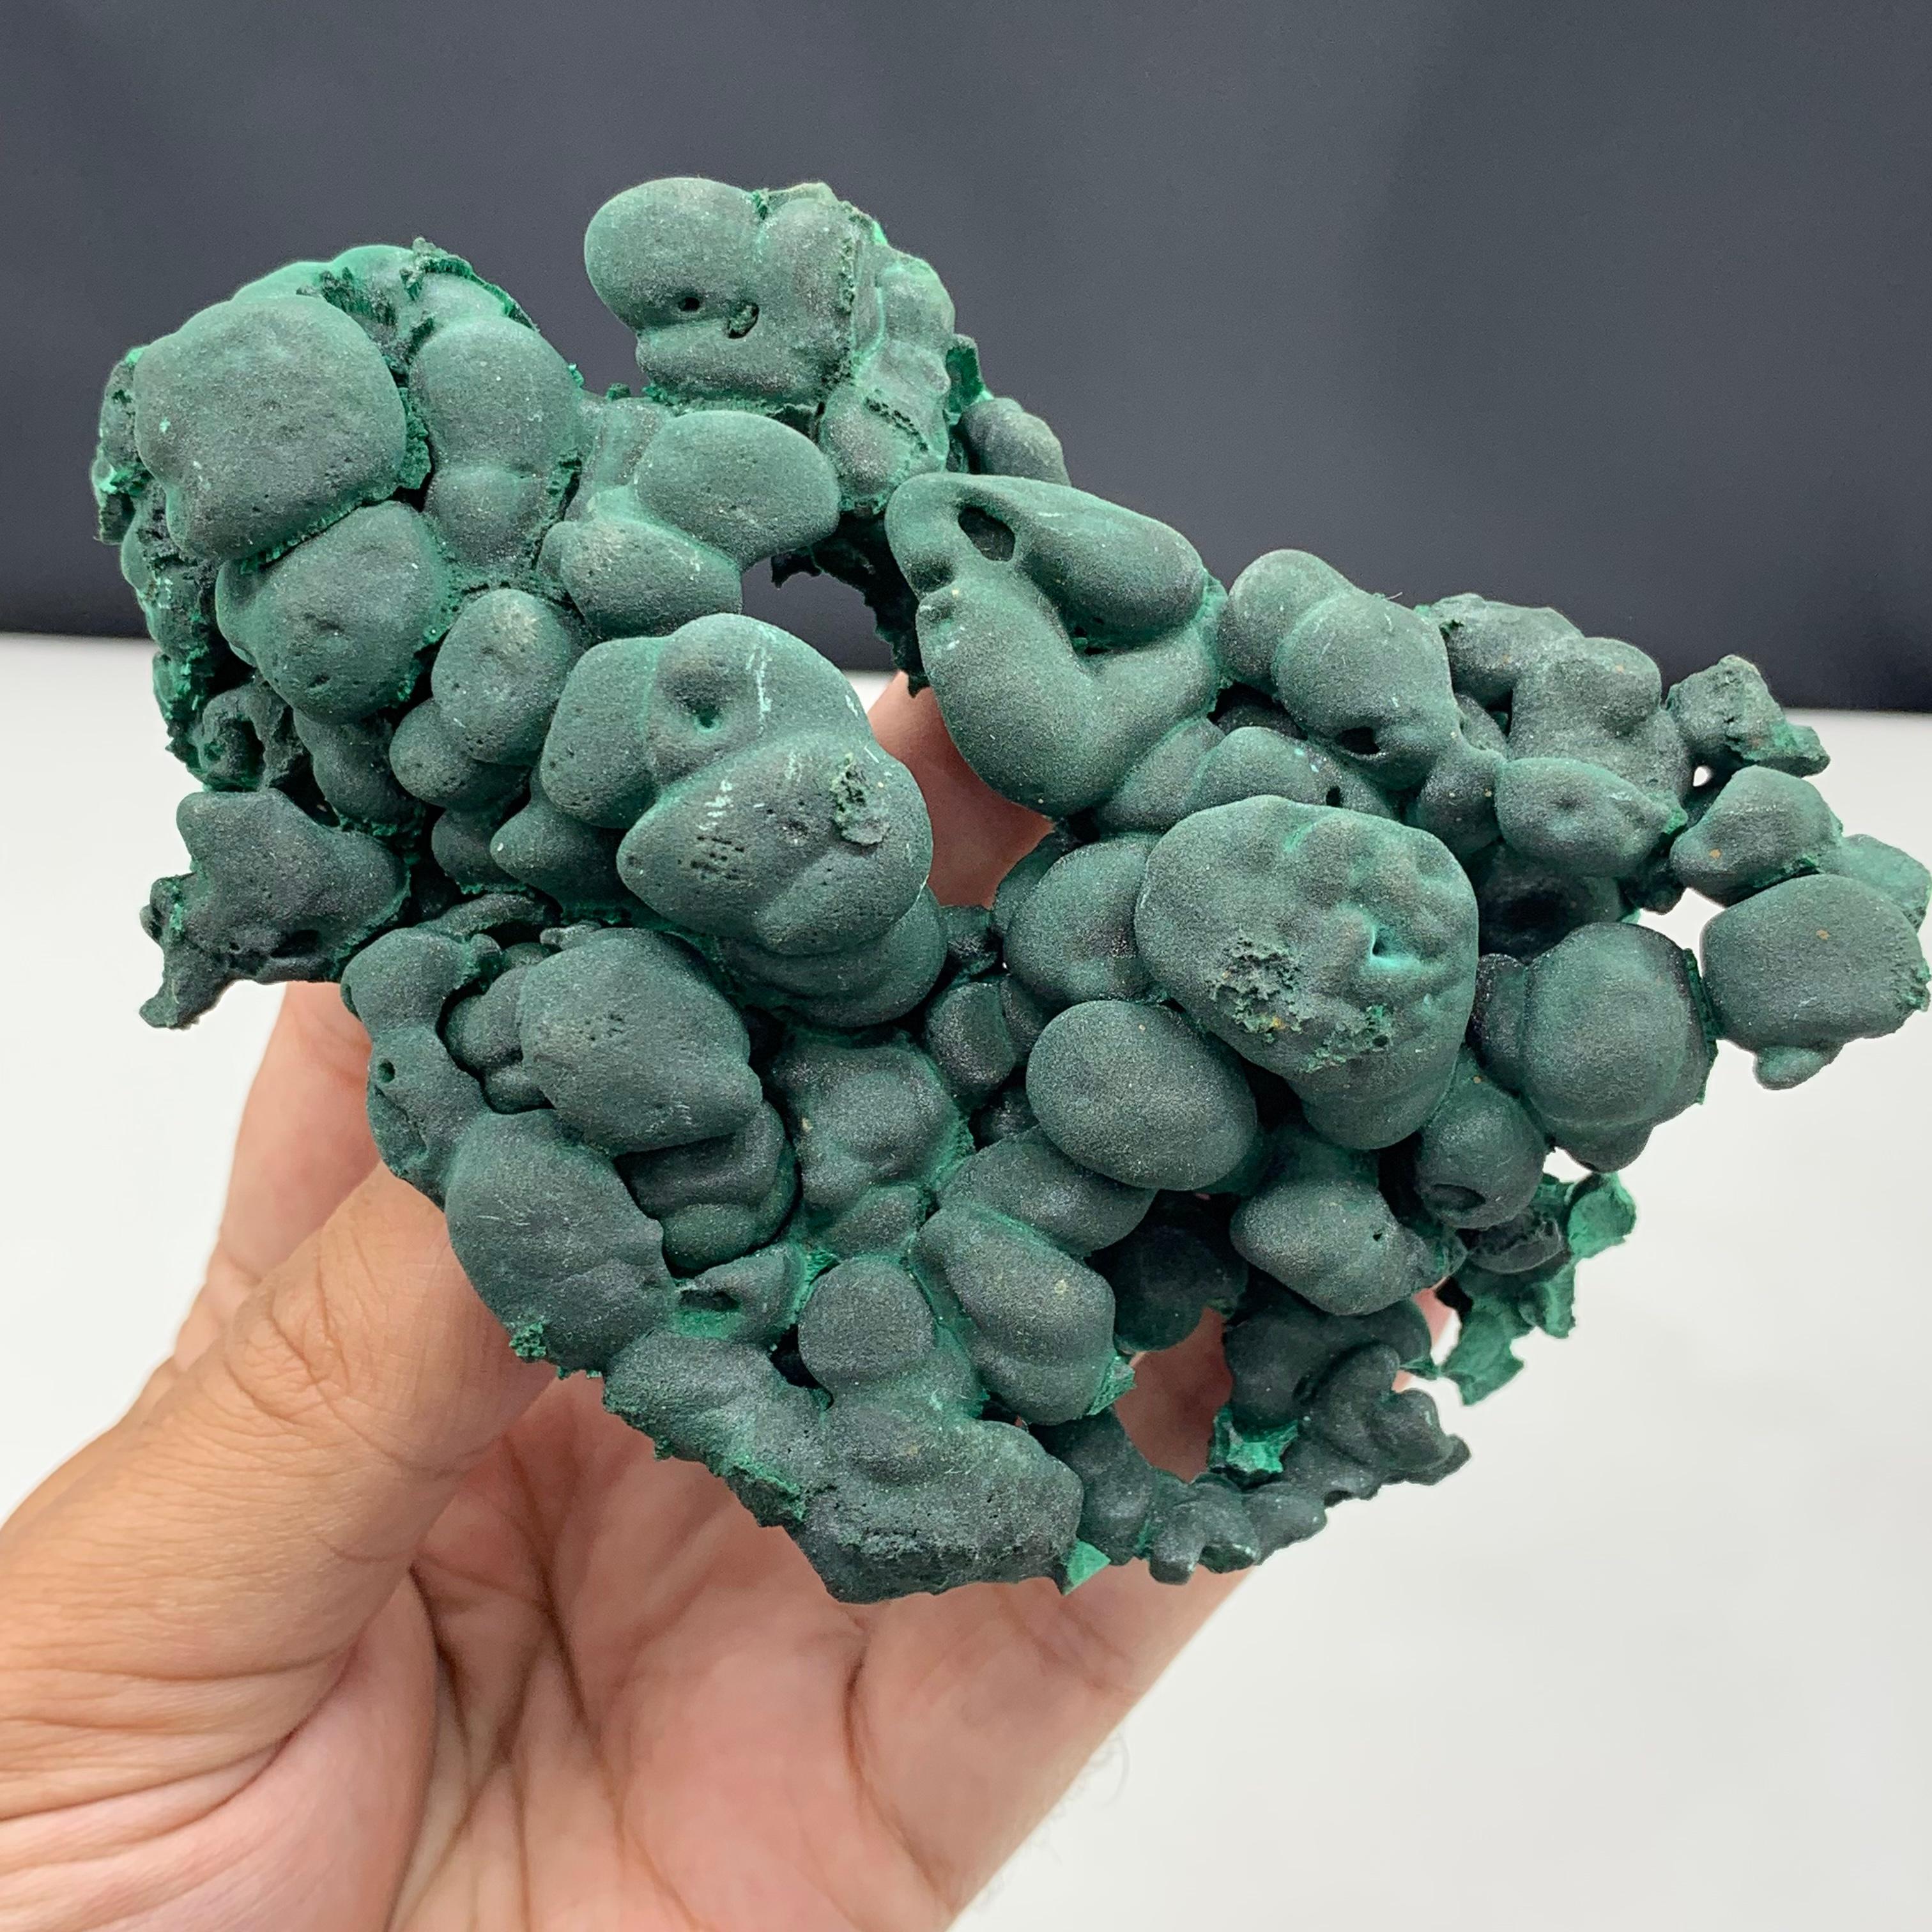 Chinese 291 Gram Incredible Alien Eye Malachite Cluster Specimen From Guangdong, China  For Sale